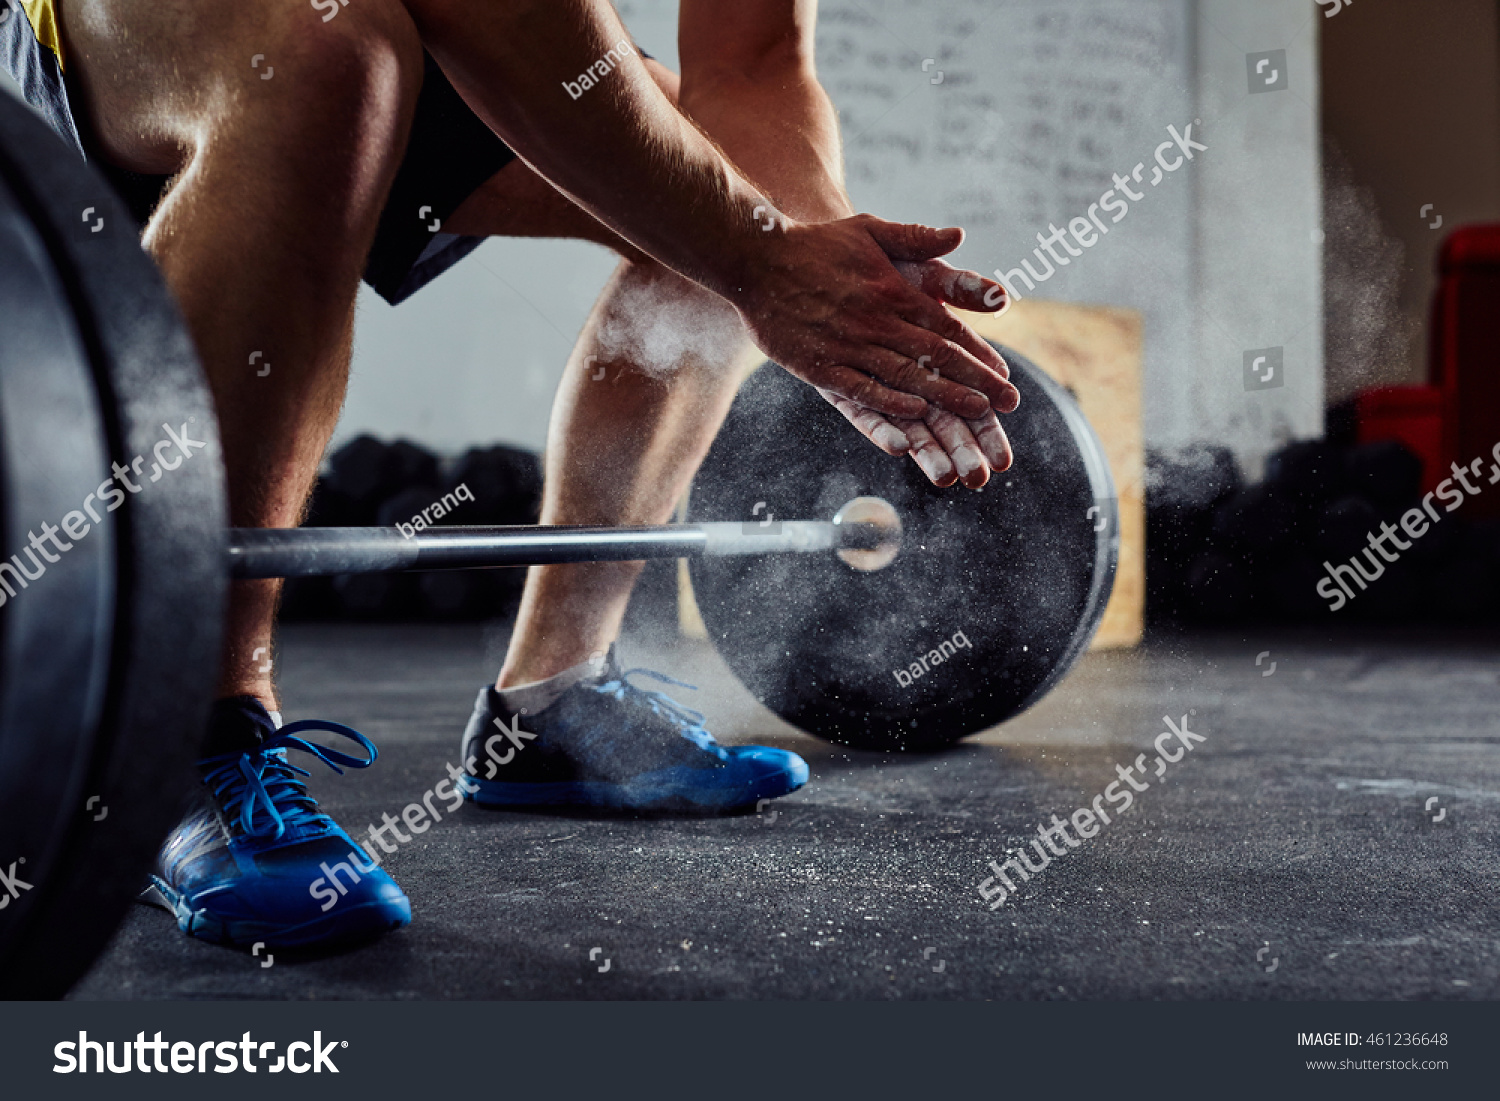 Closeup of weightlifter clapping hands before  barbell workout at the gym #461236648